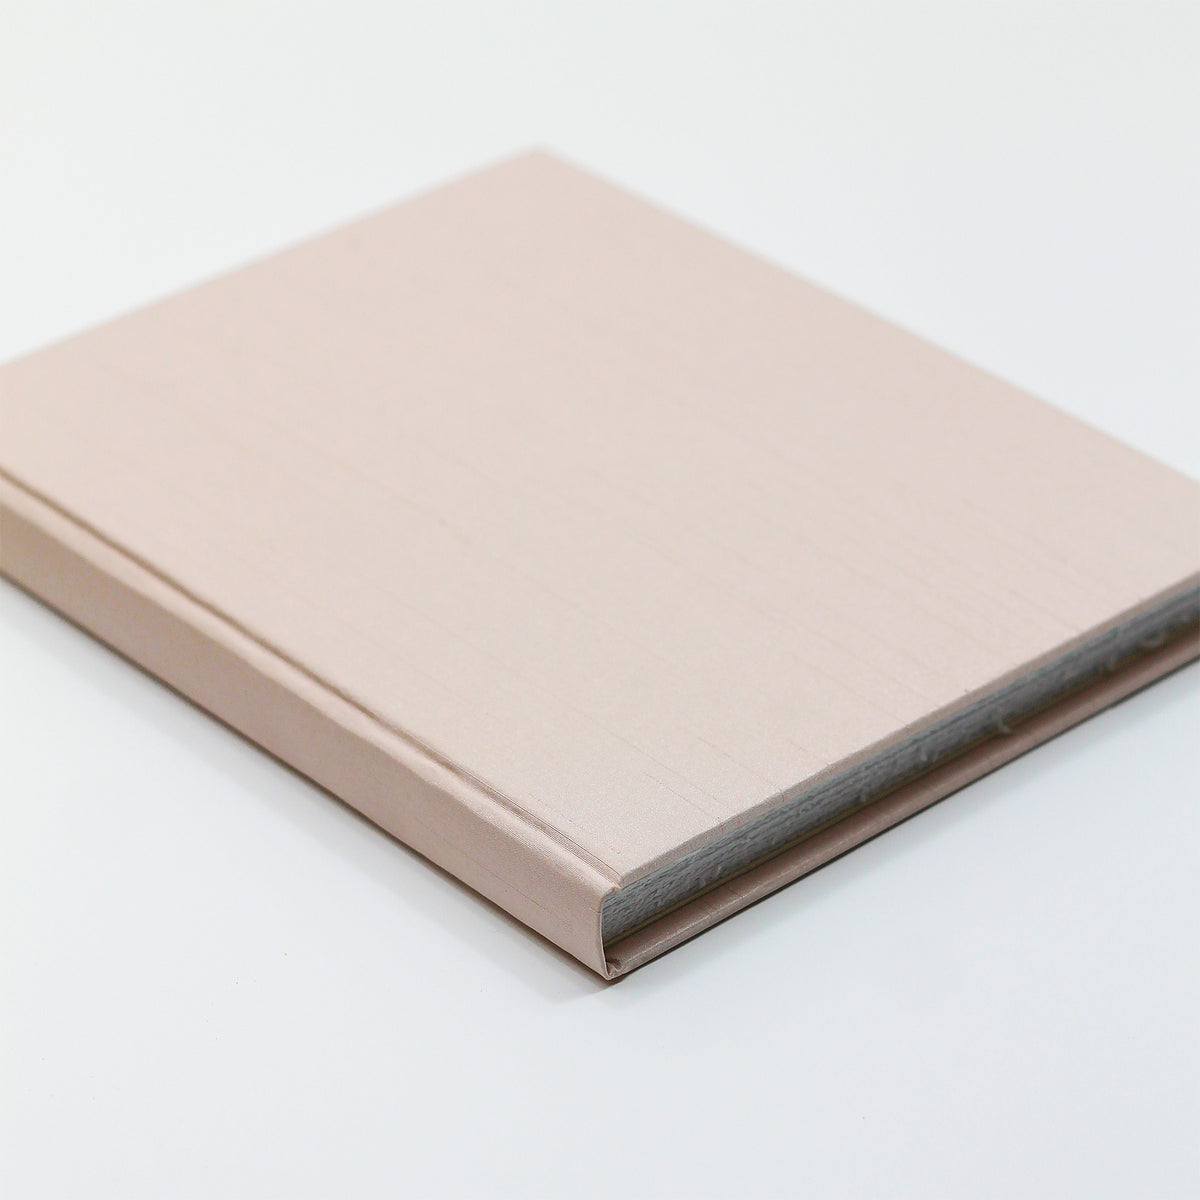 Large 8x10 Blank Page Journal | Cover: Blush Pink Silk | Available Personalized